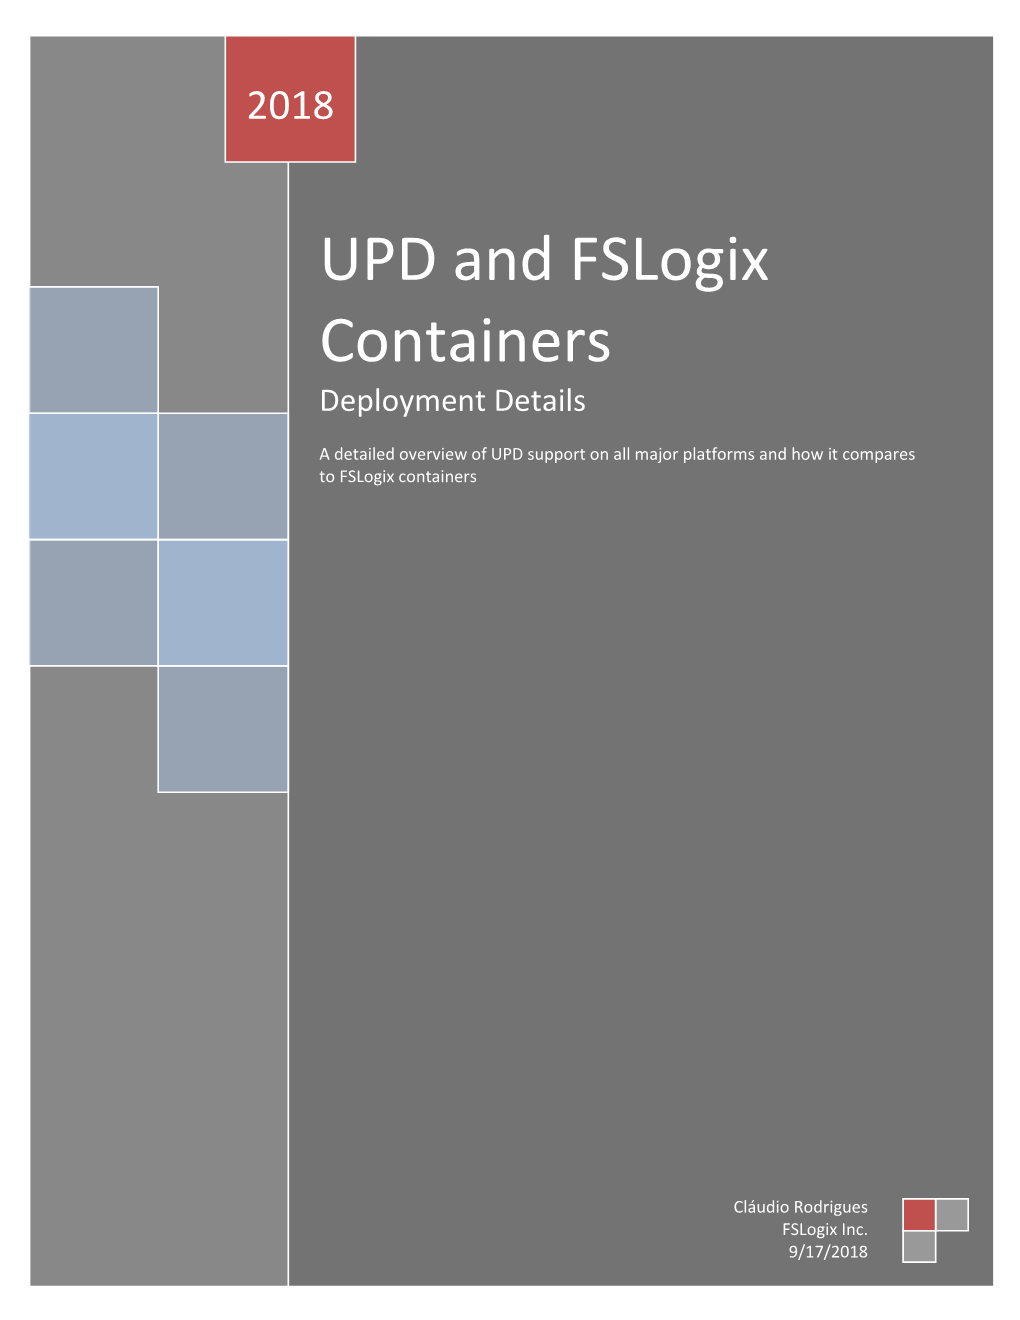 UPD and Fslogix Containers Deployment Details